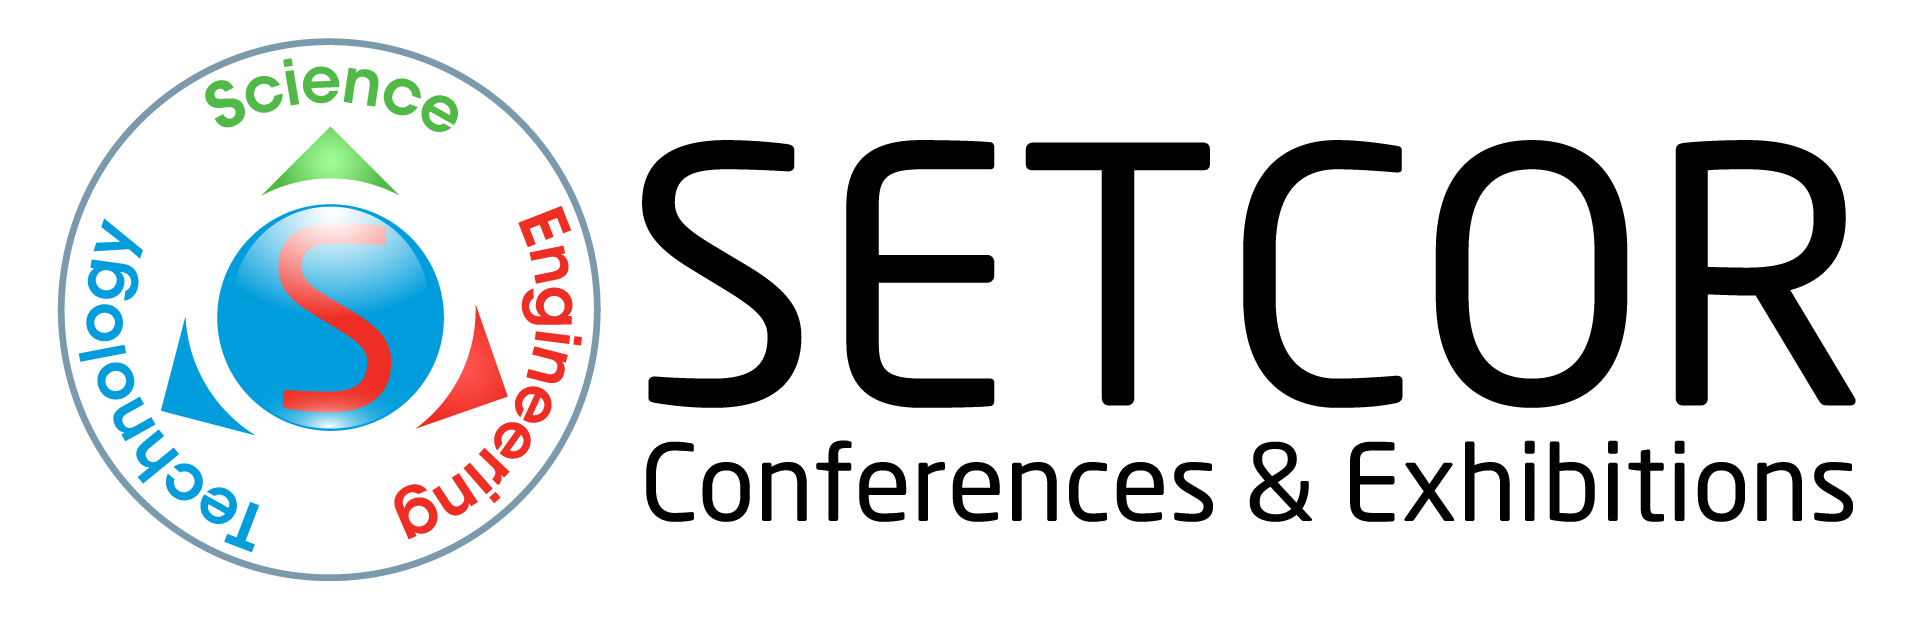 Setcor Conferences and events